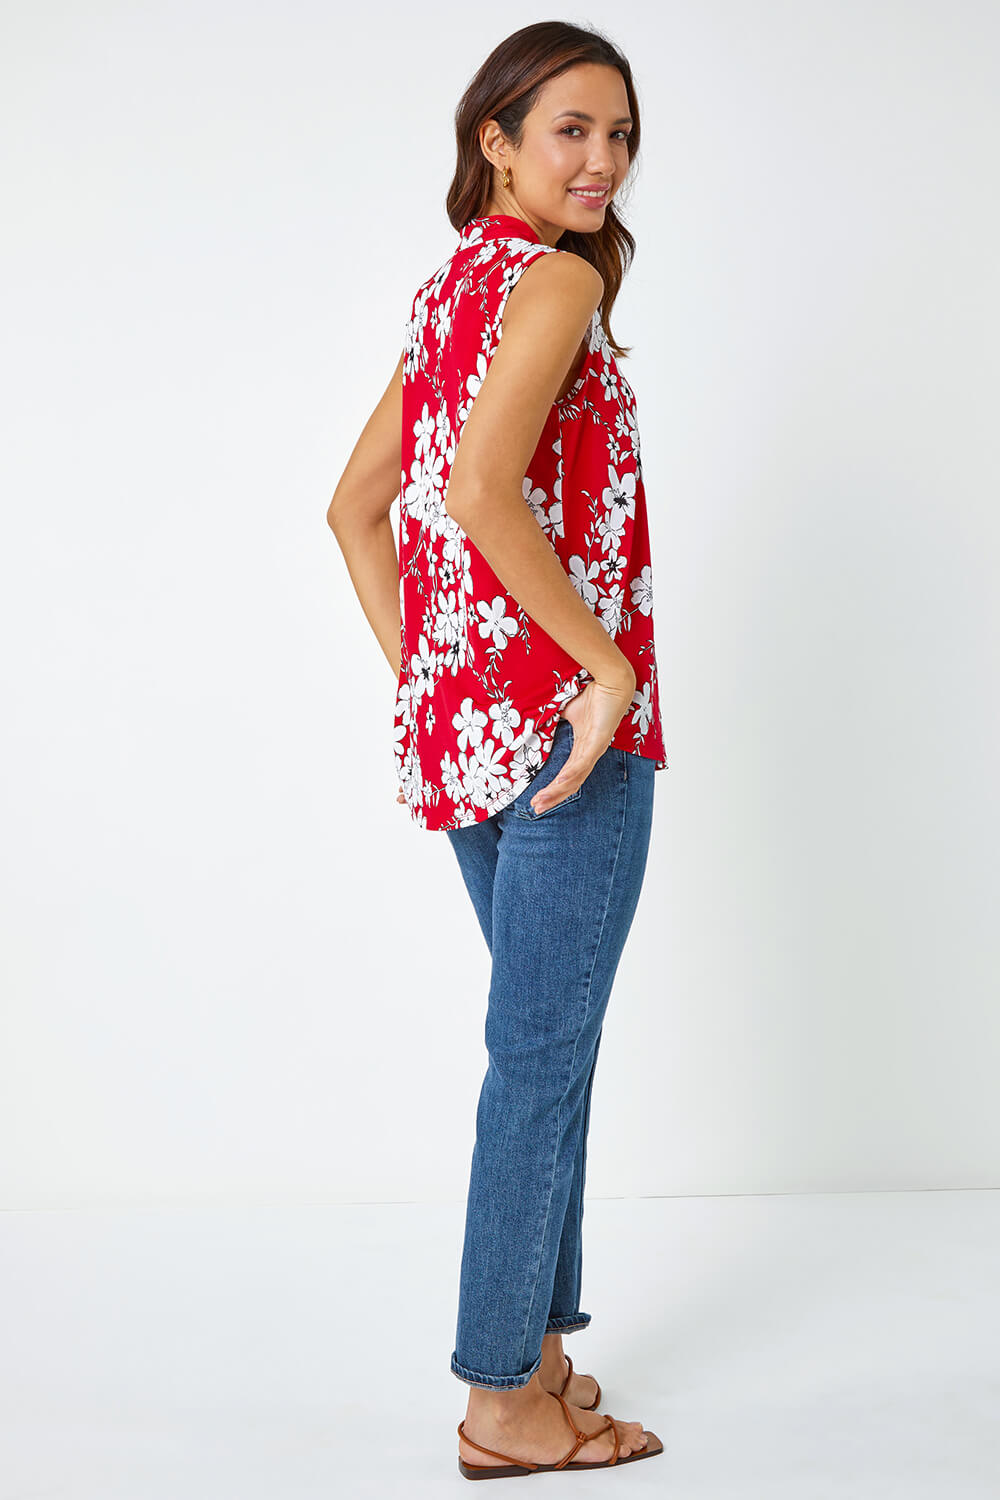 Red Textured Floral Print Sleeveless Top, Image 3 of 5